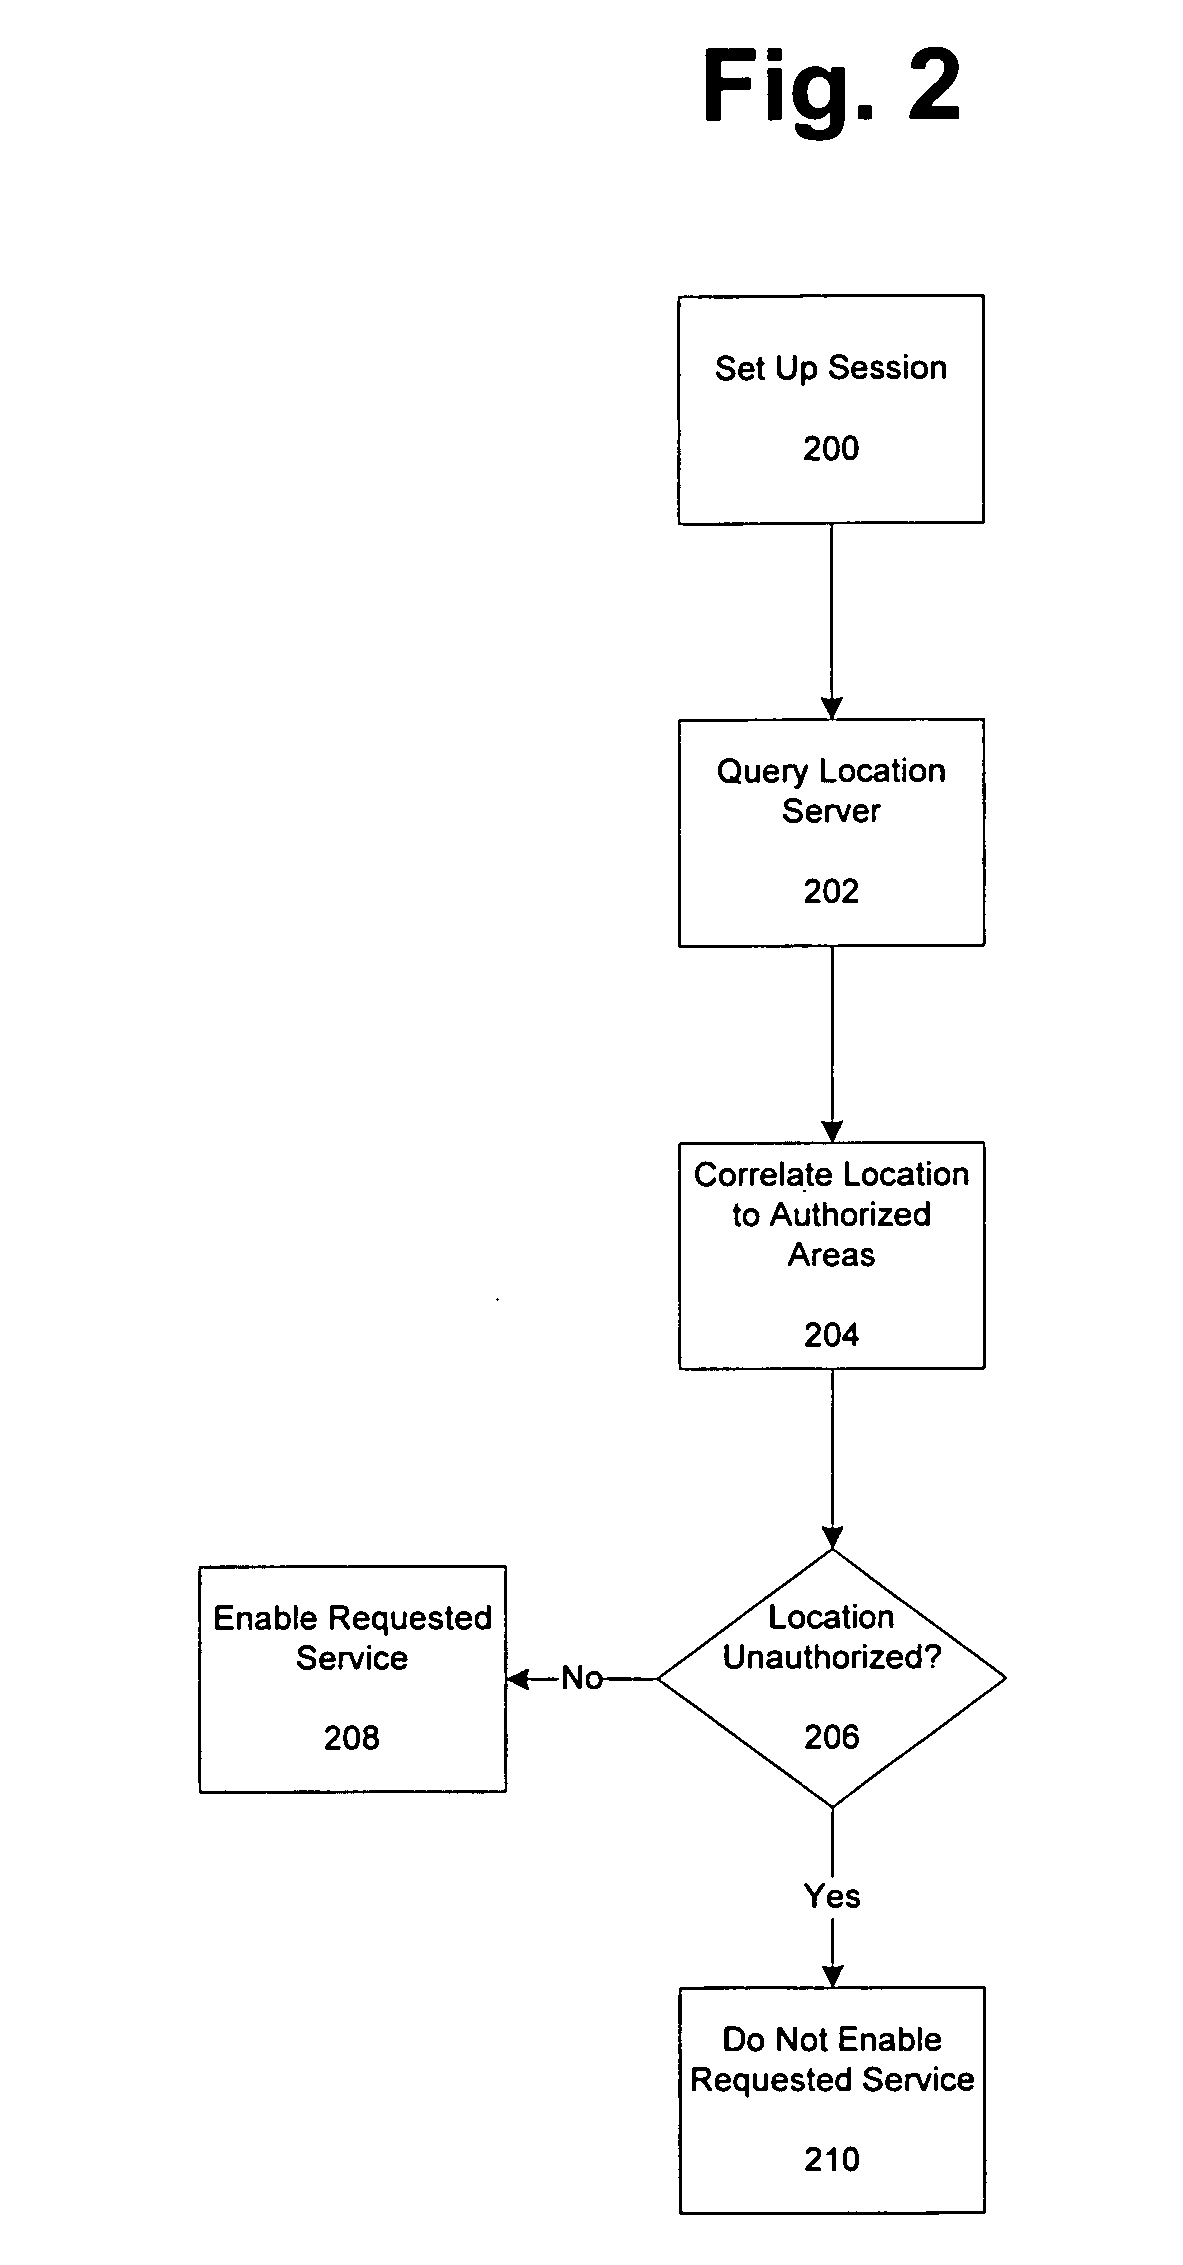 Limiting services based on location